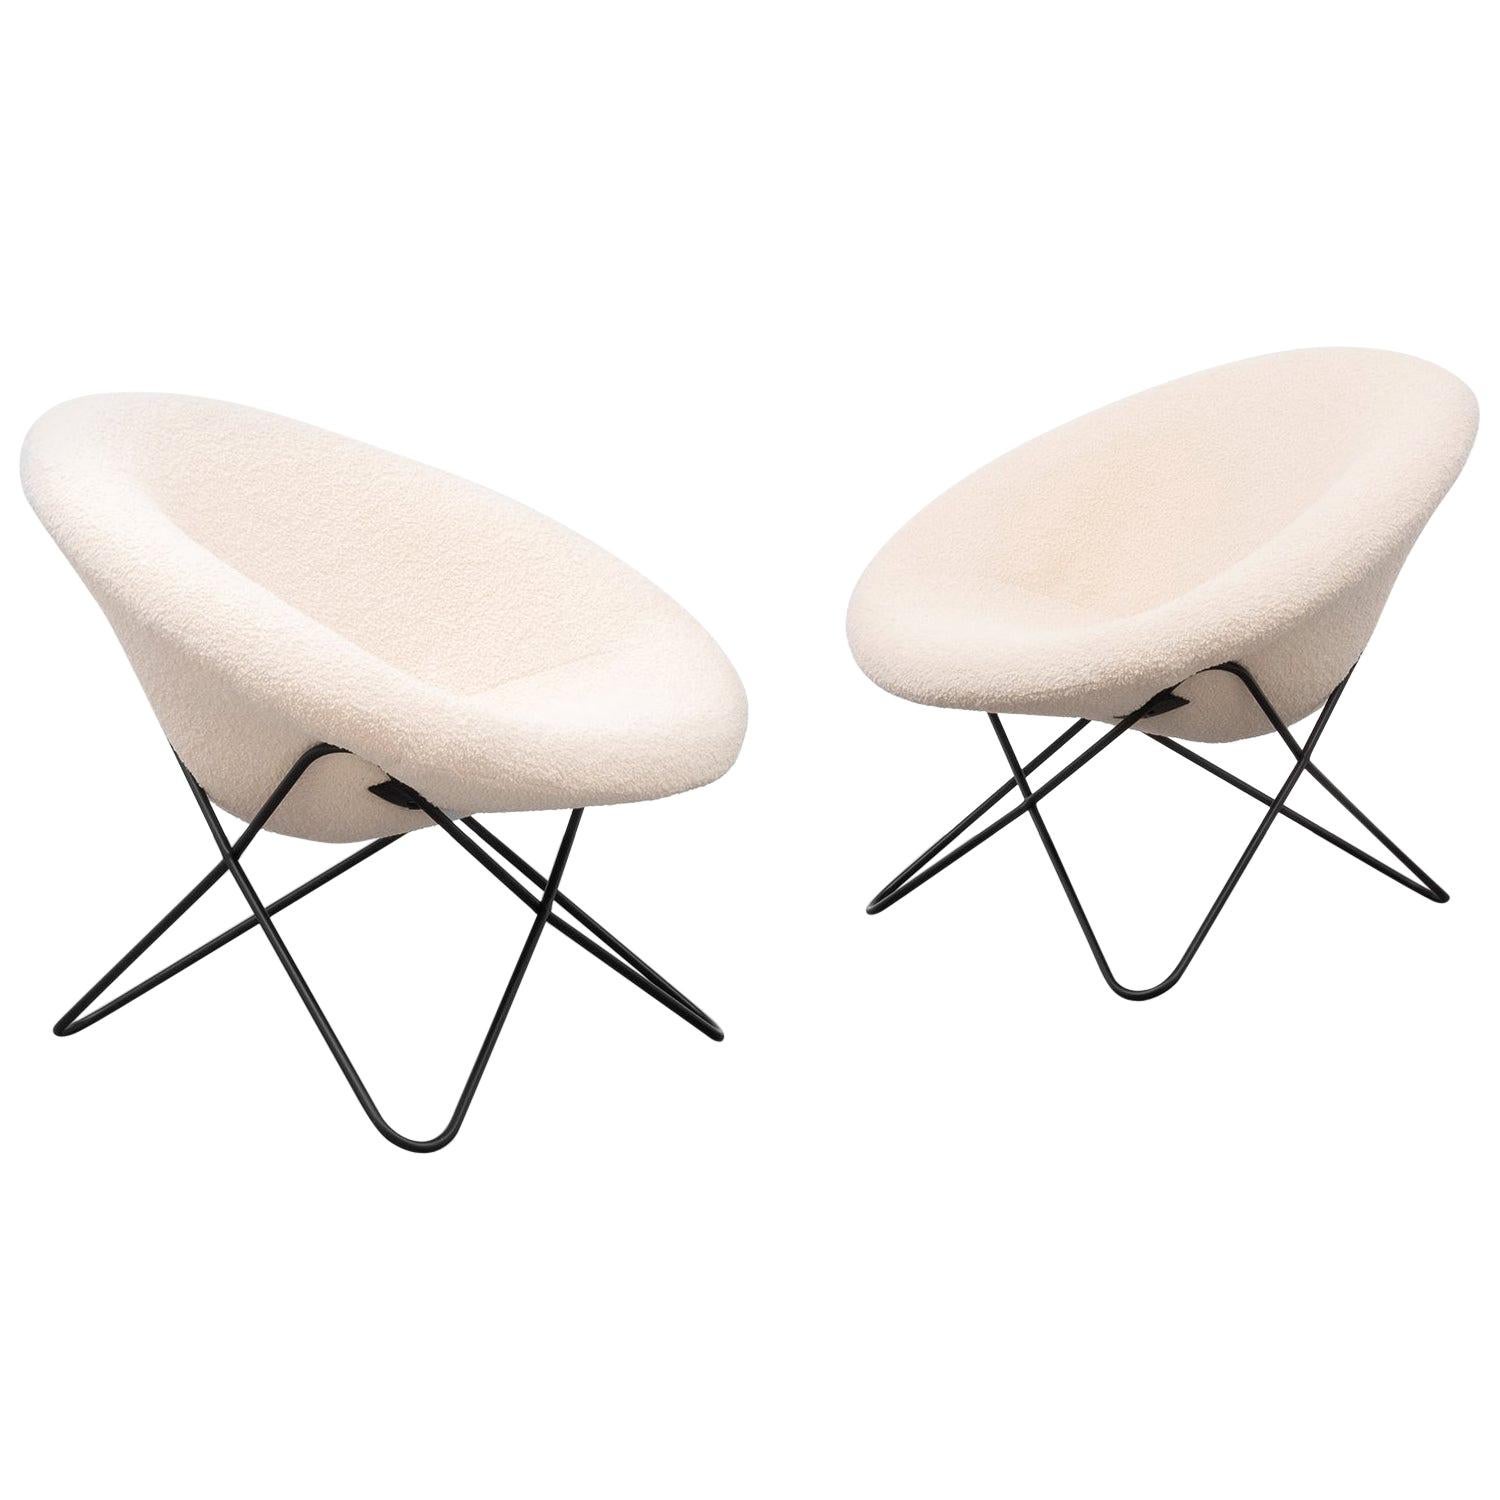 Pair of Hairpin Chairs, France, 1950s